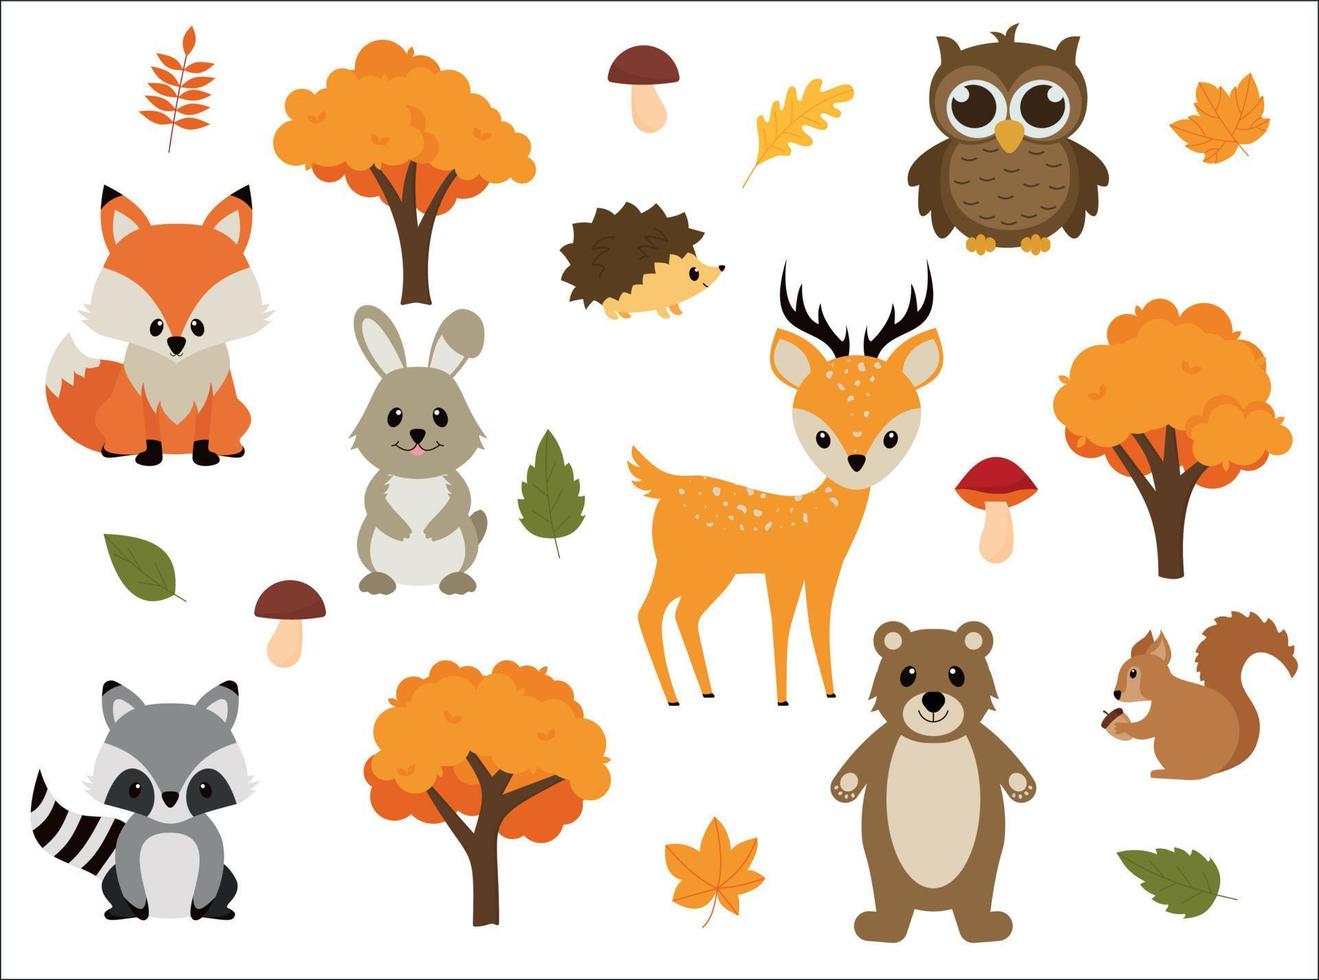 Vector illustration of cute woodland forest animals including a bear, deer, fox, raccoon, hedgehog, squirrel, and rabbit. eps 10